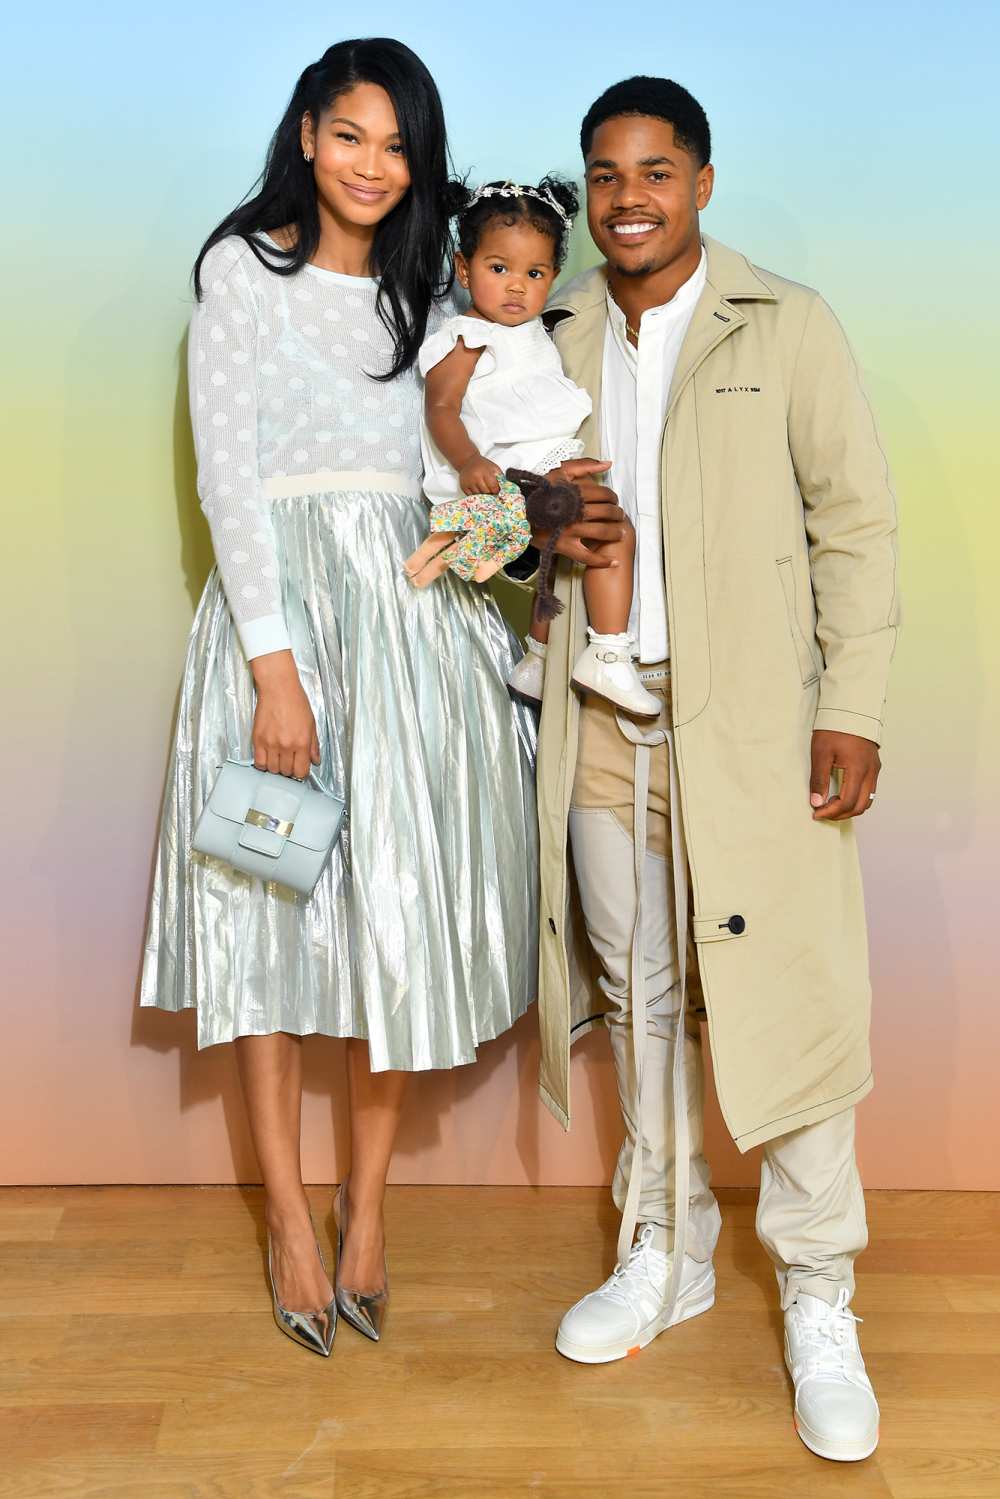 Sterling Shephard Chanel Iman Daughter Could Be a Mode